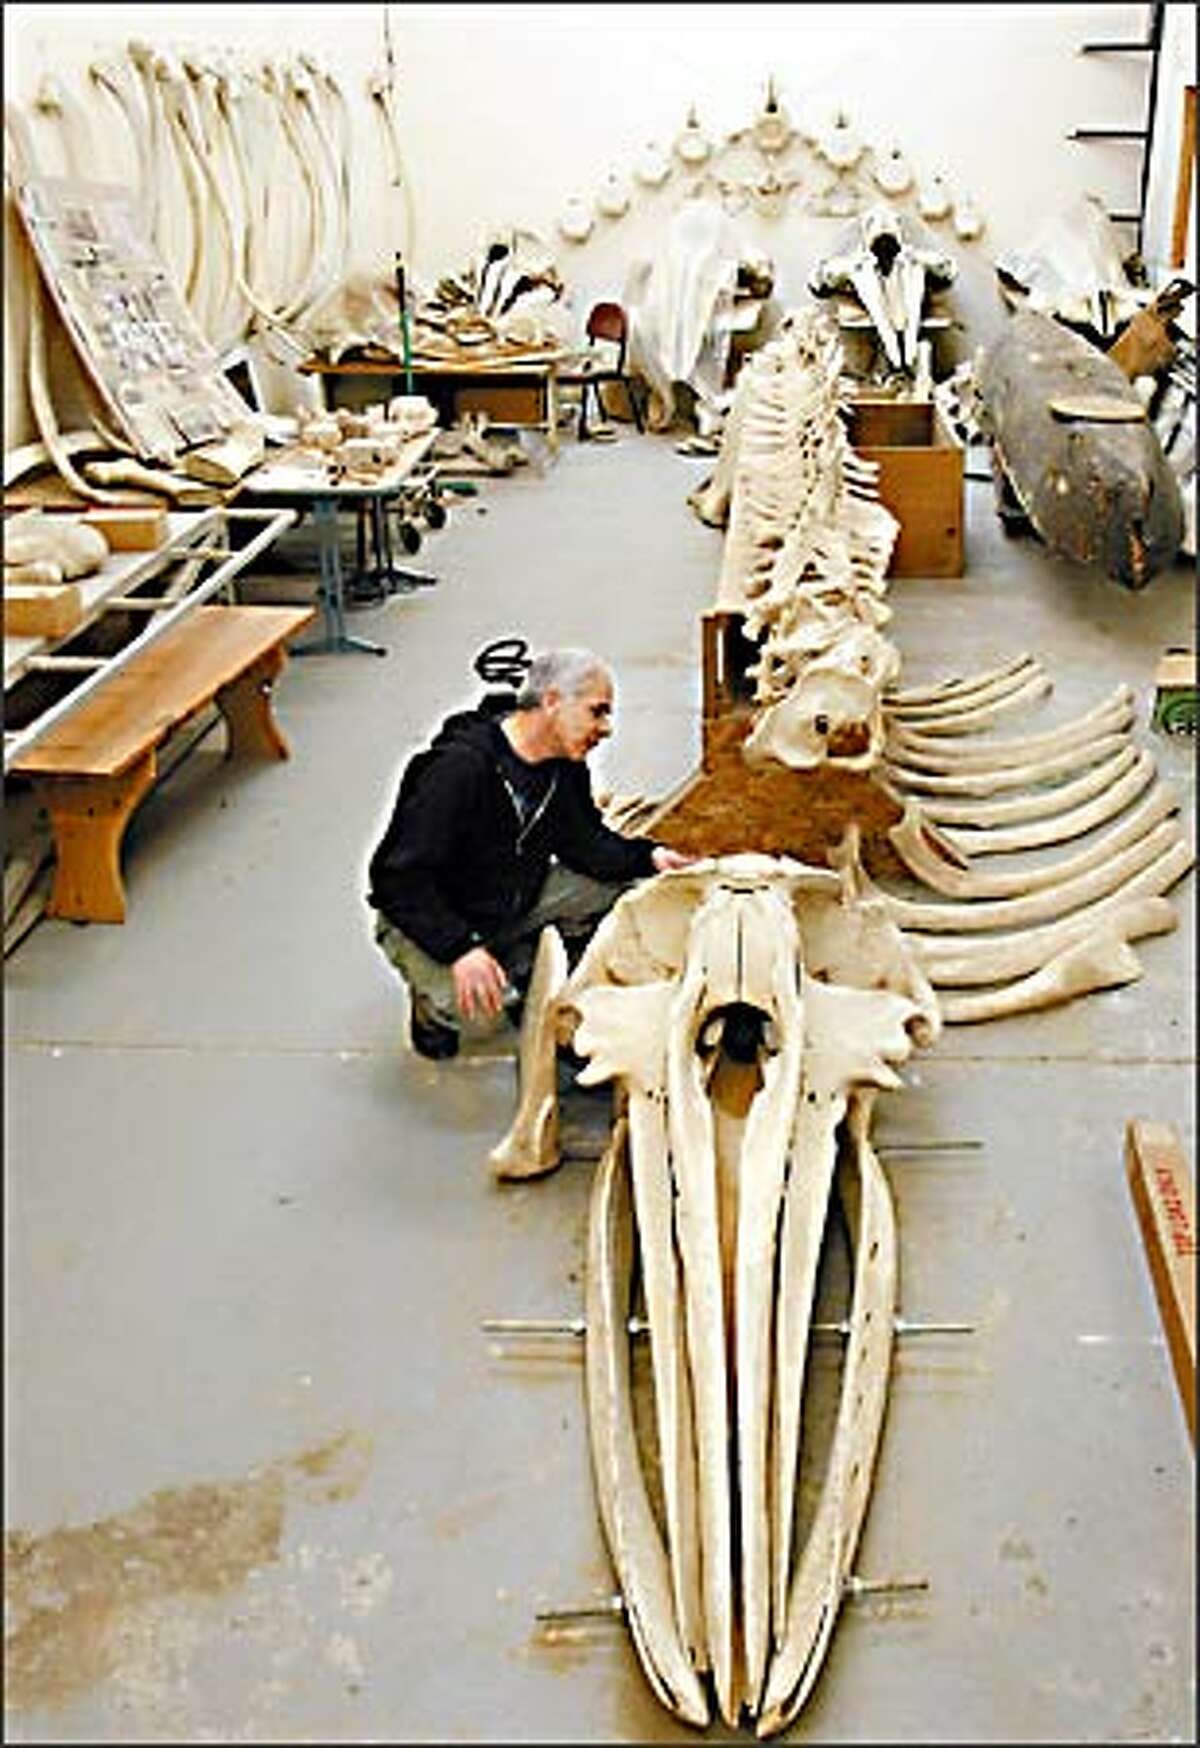 In the Makah high school wood shop building, Wayne Johnson examines the skull of a gray whale taken in 1999 by tribe members, with him as their captain. The skeleton is expected to be moved soon to the tribe museum.